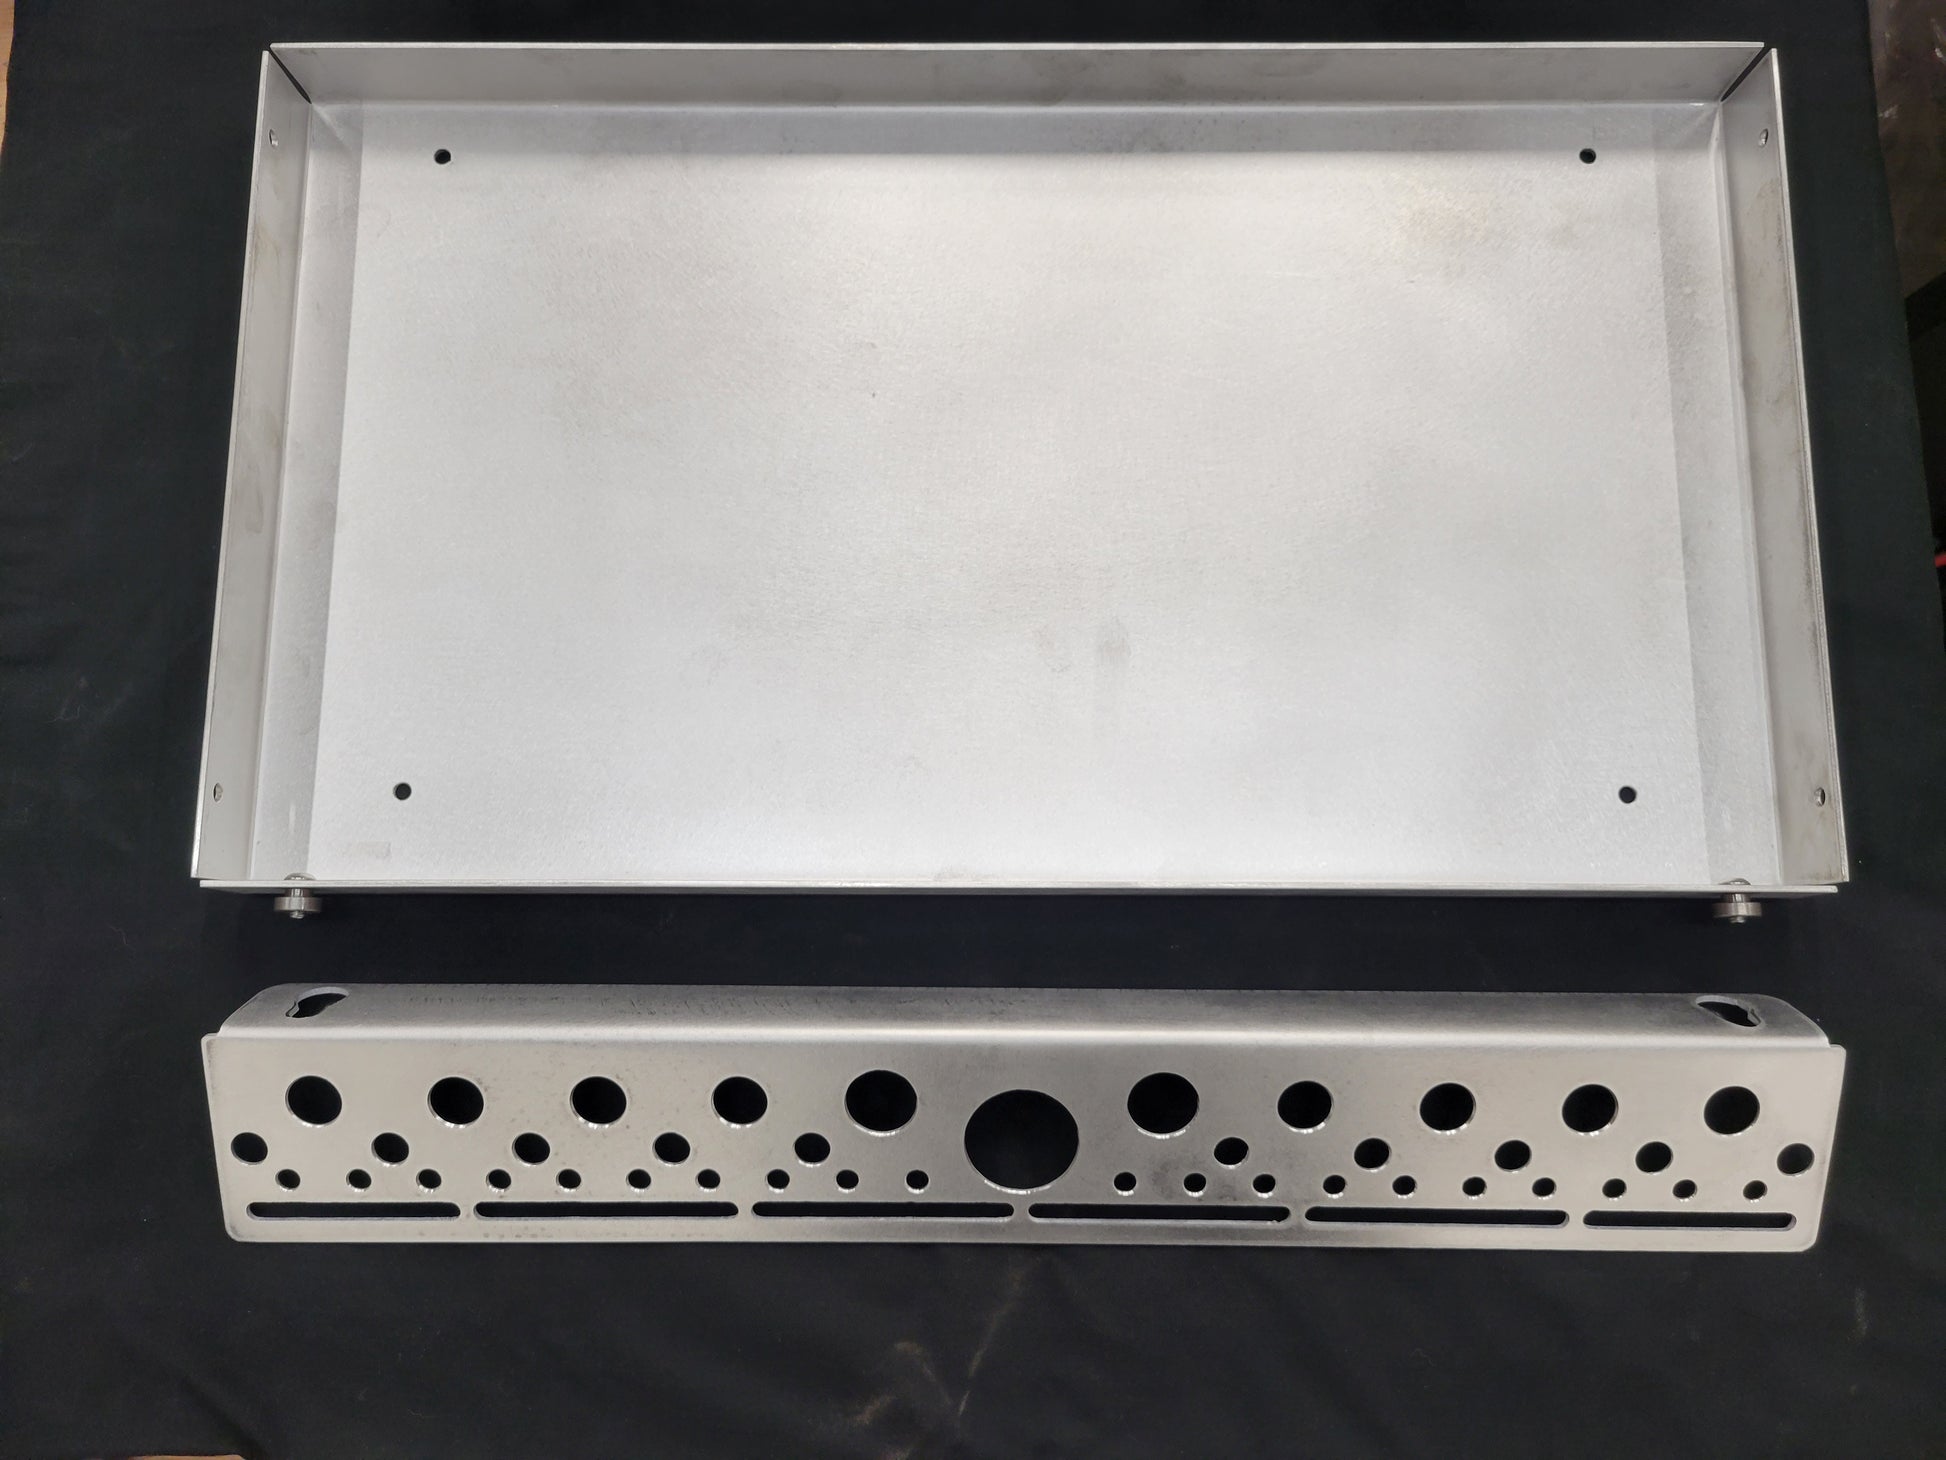 Anson PDR Tool Mat Packout tray